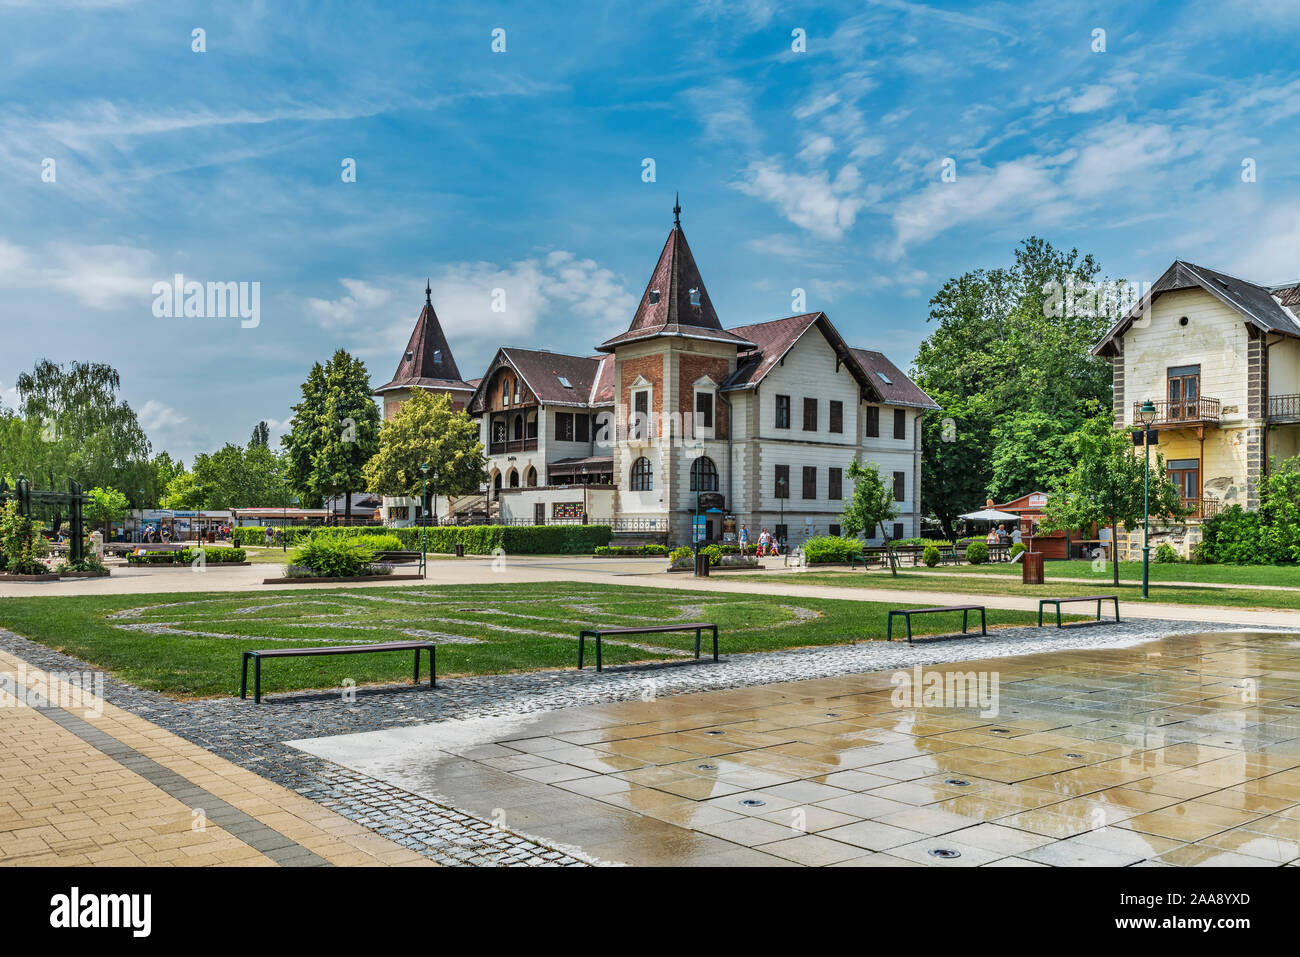 Hotel Hullam was opened in 1894. Next to it is the Hotel Balaton, it was opened in 1895, Keszthely, Zala county, Western Transdanubia, Hungary, Europe Stock Photo